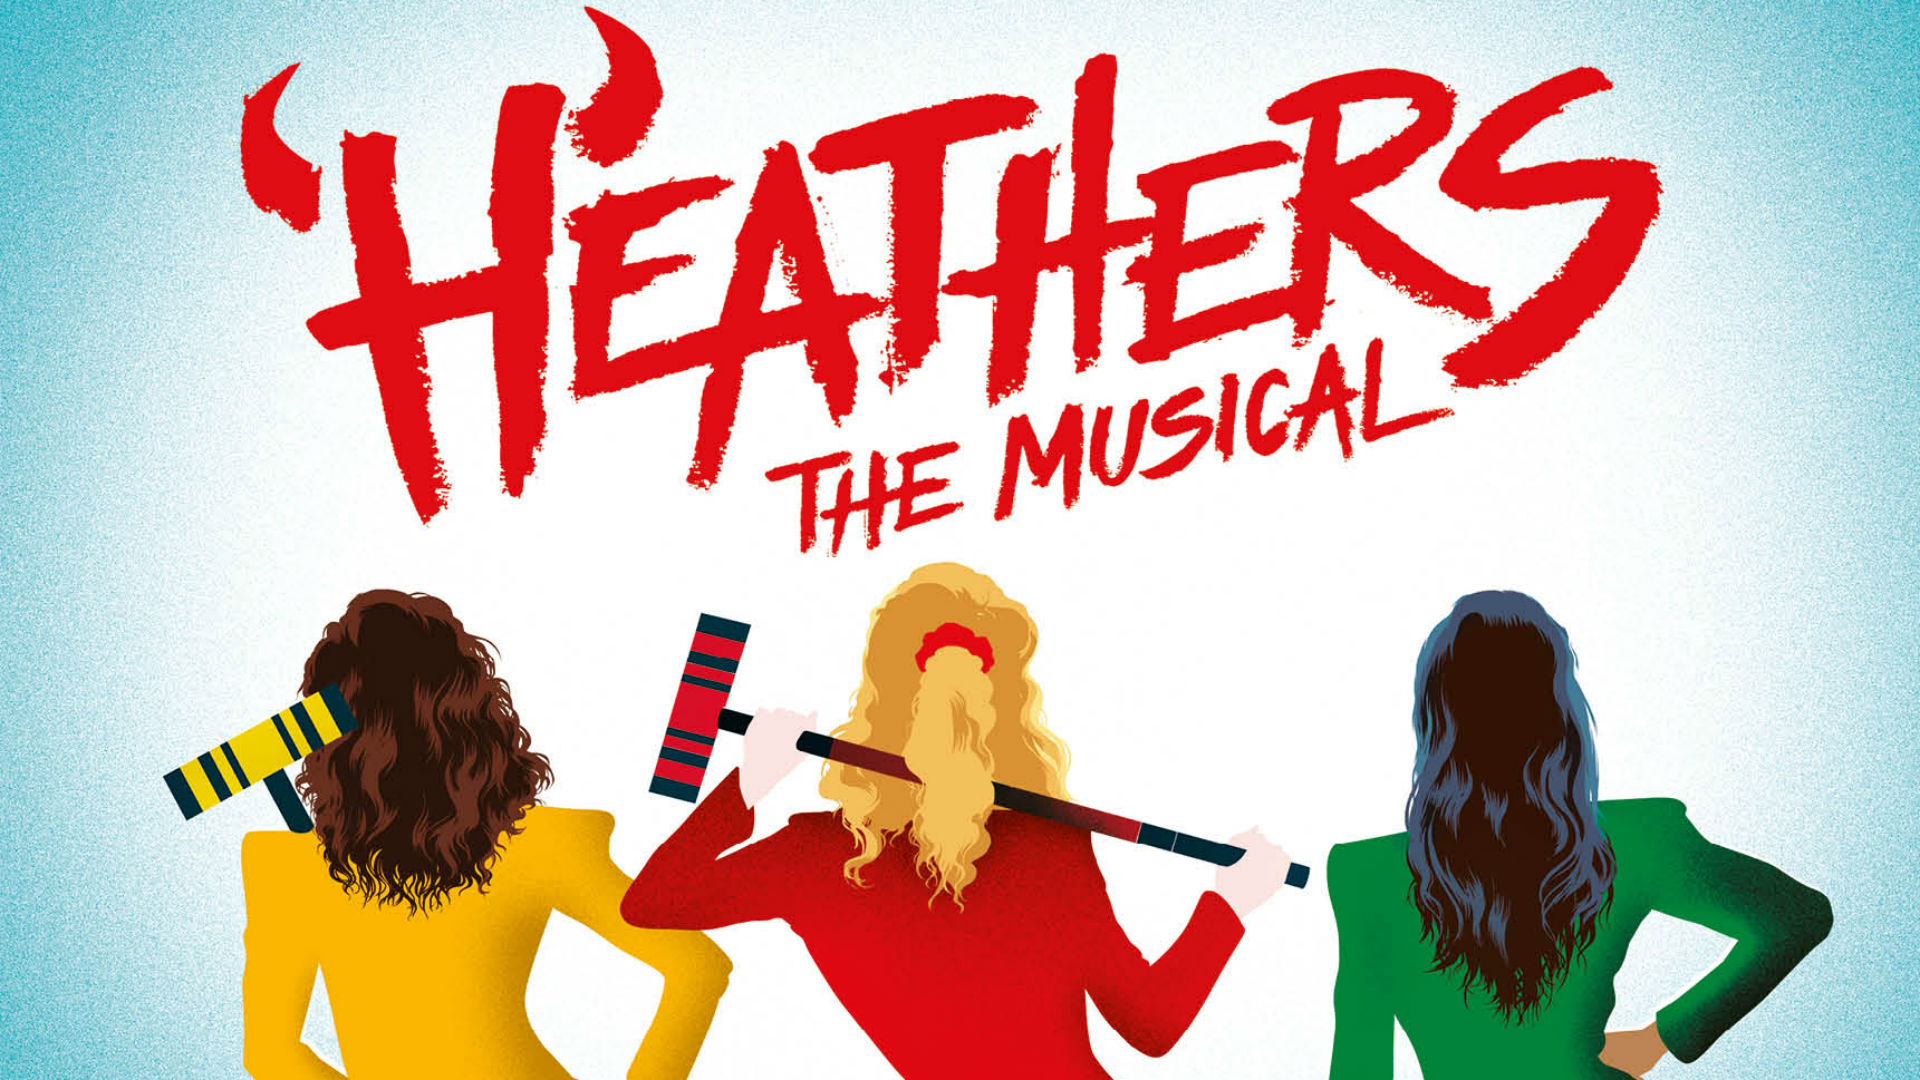 Heathers The Musical, written in red, above the back view of three women wearing blazers and holding croquet mallets.